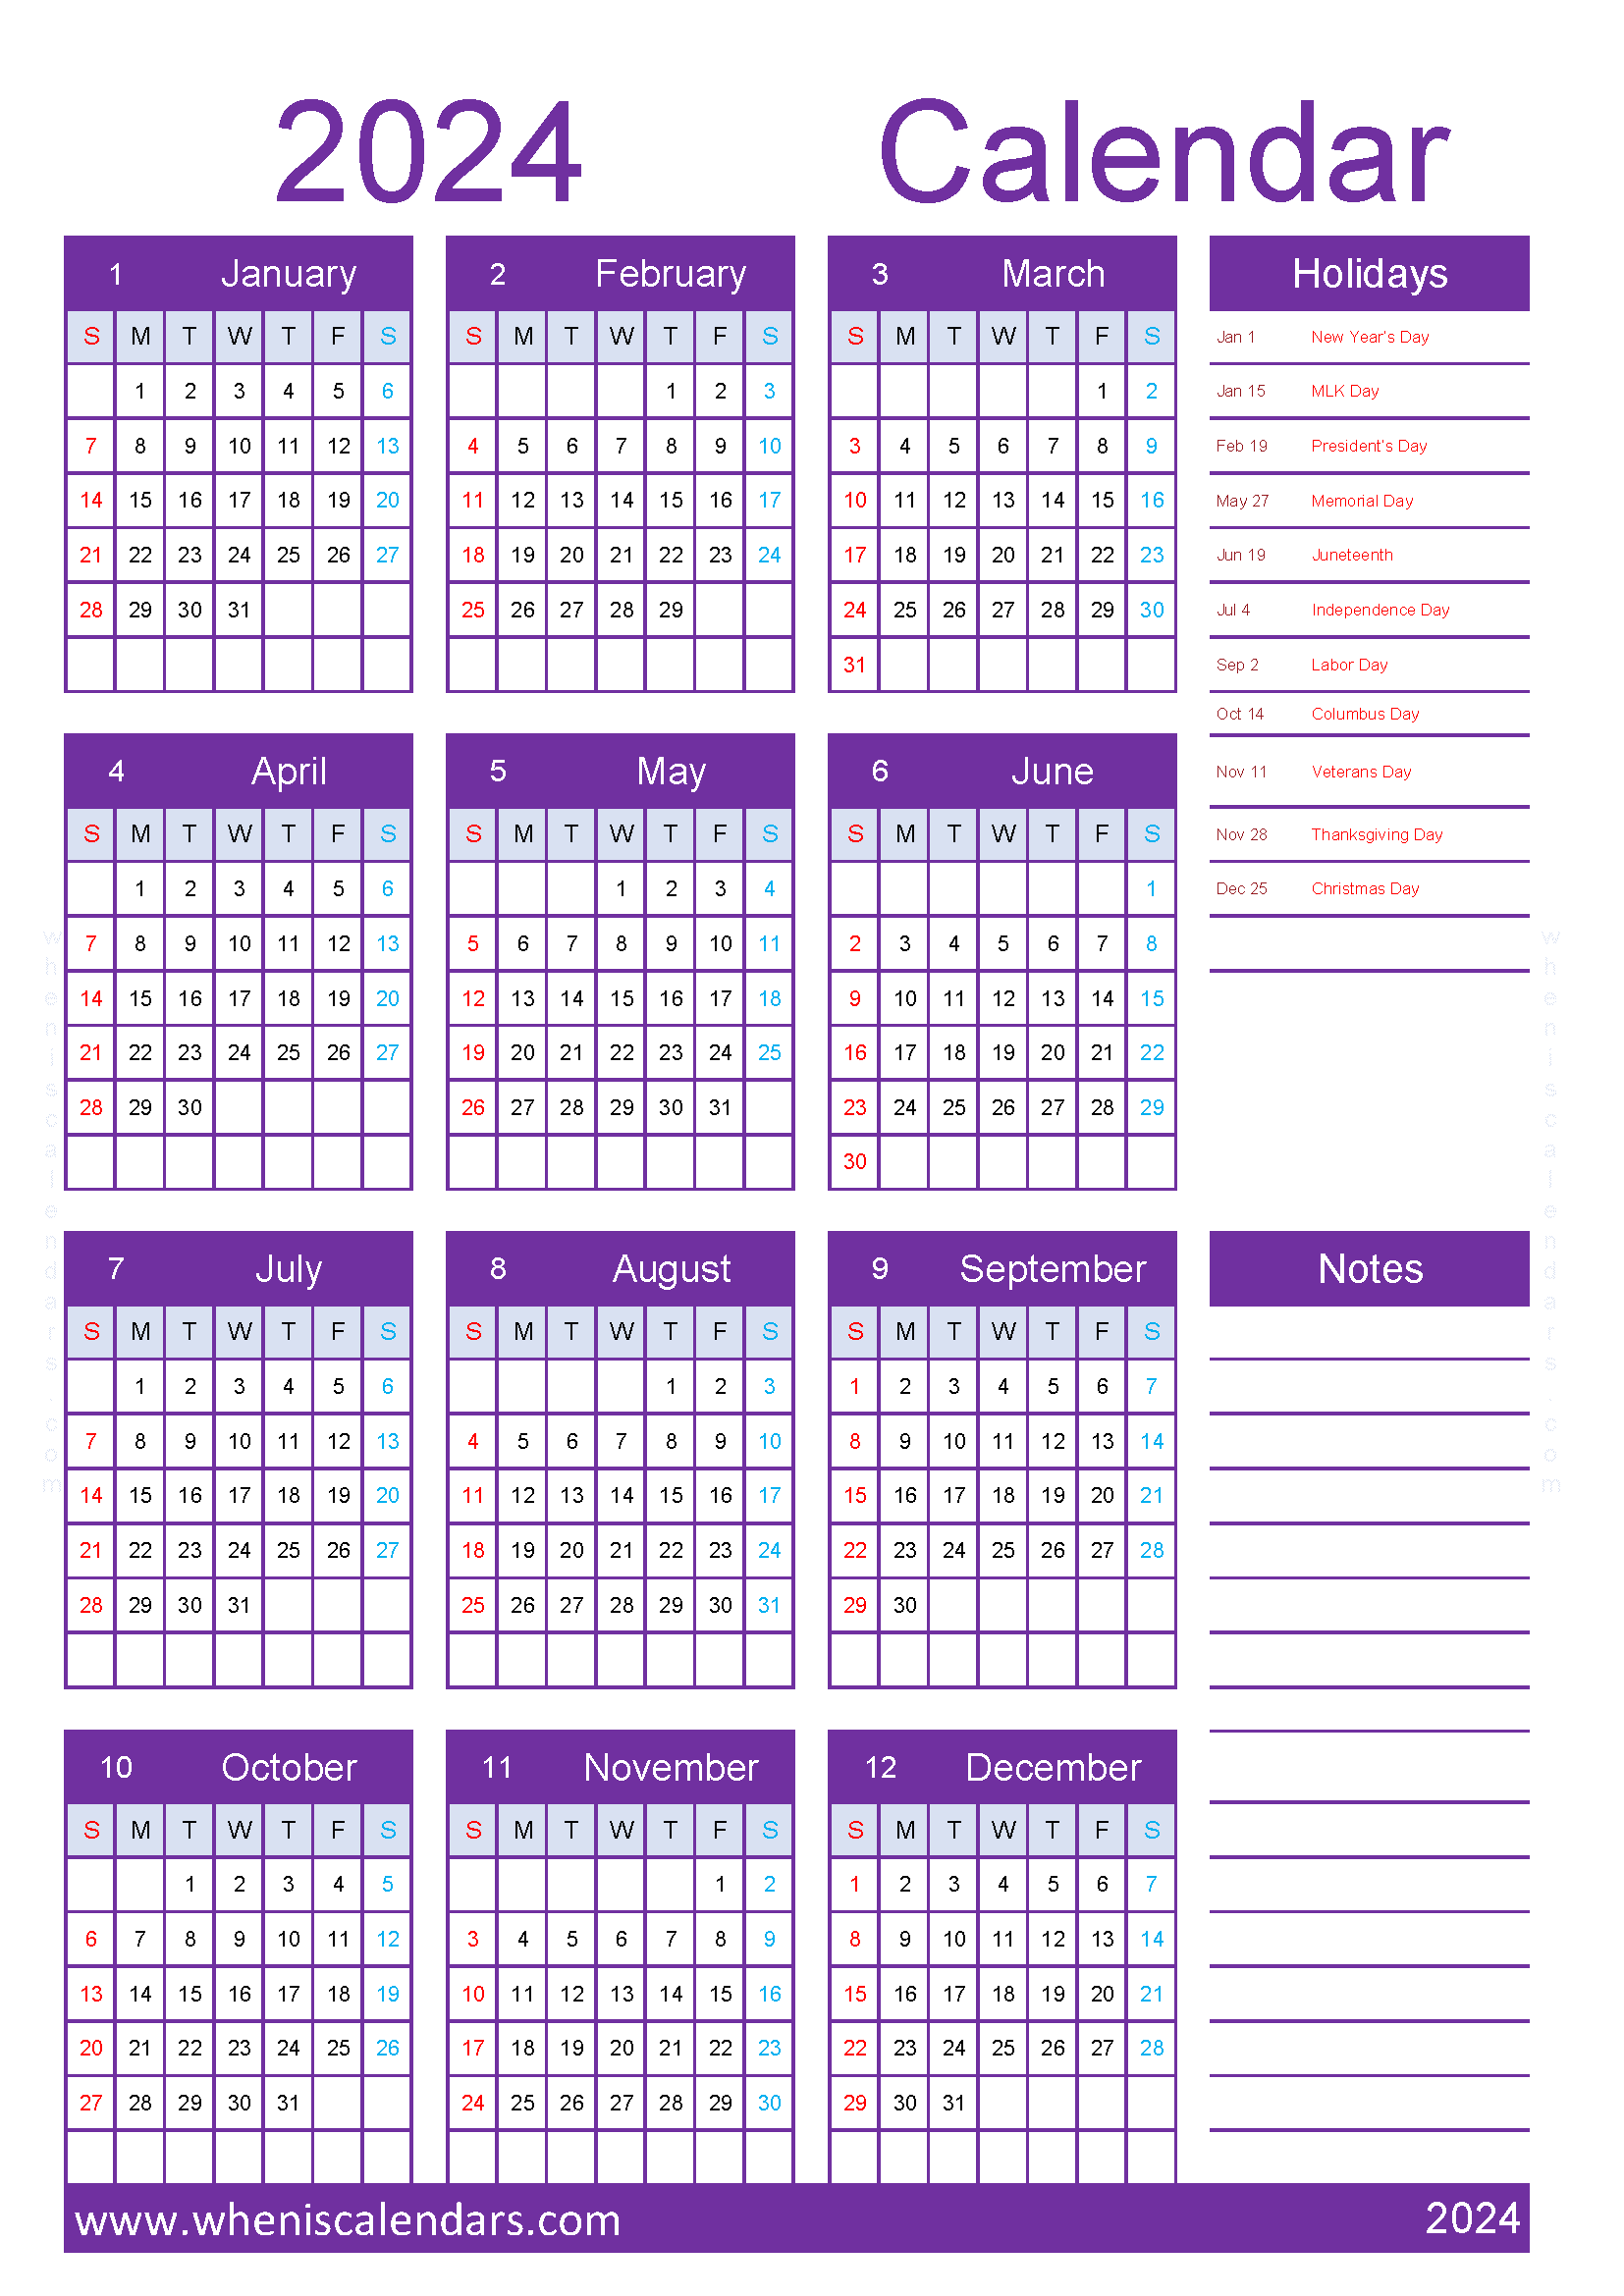 Calendar 2024 with Holidays printable free A4 in vertical portrait